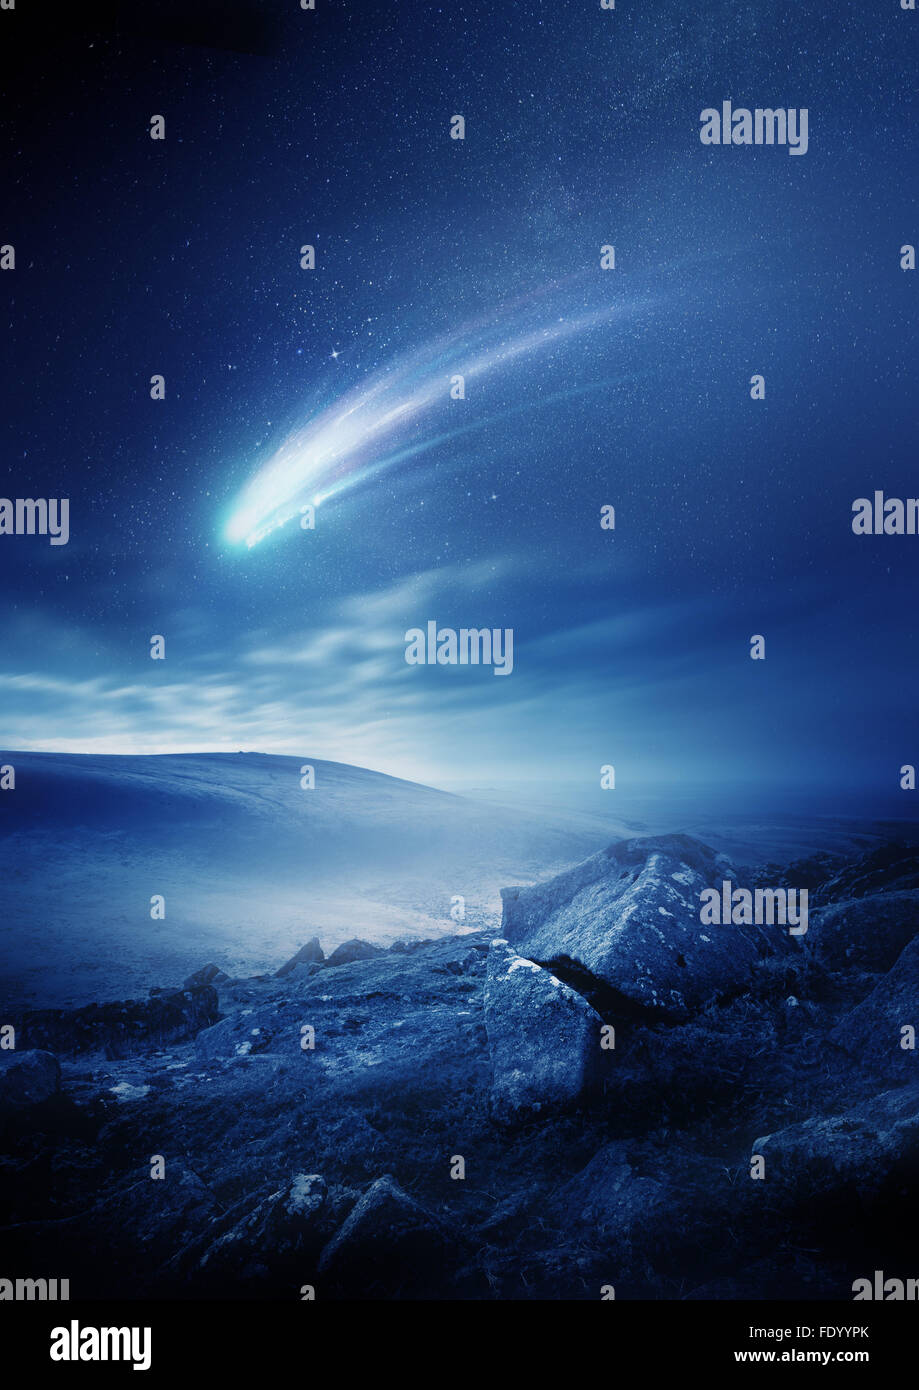 A bright comet with large dust and gas trails as it gets close to the Sun on a misty evening. Illustration. Stock Photo